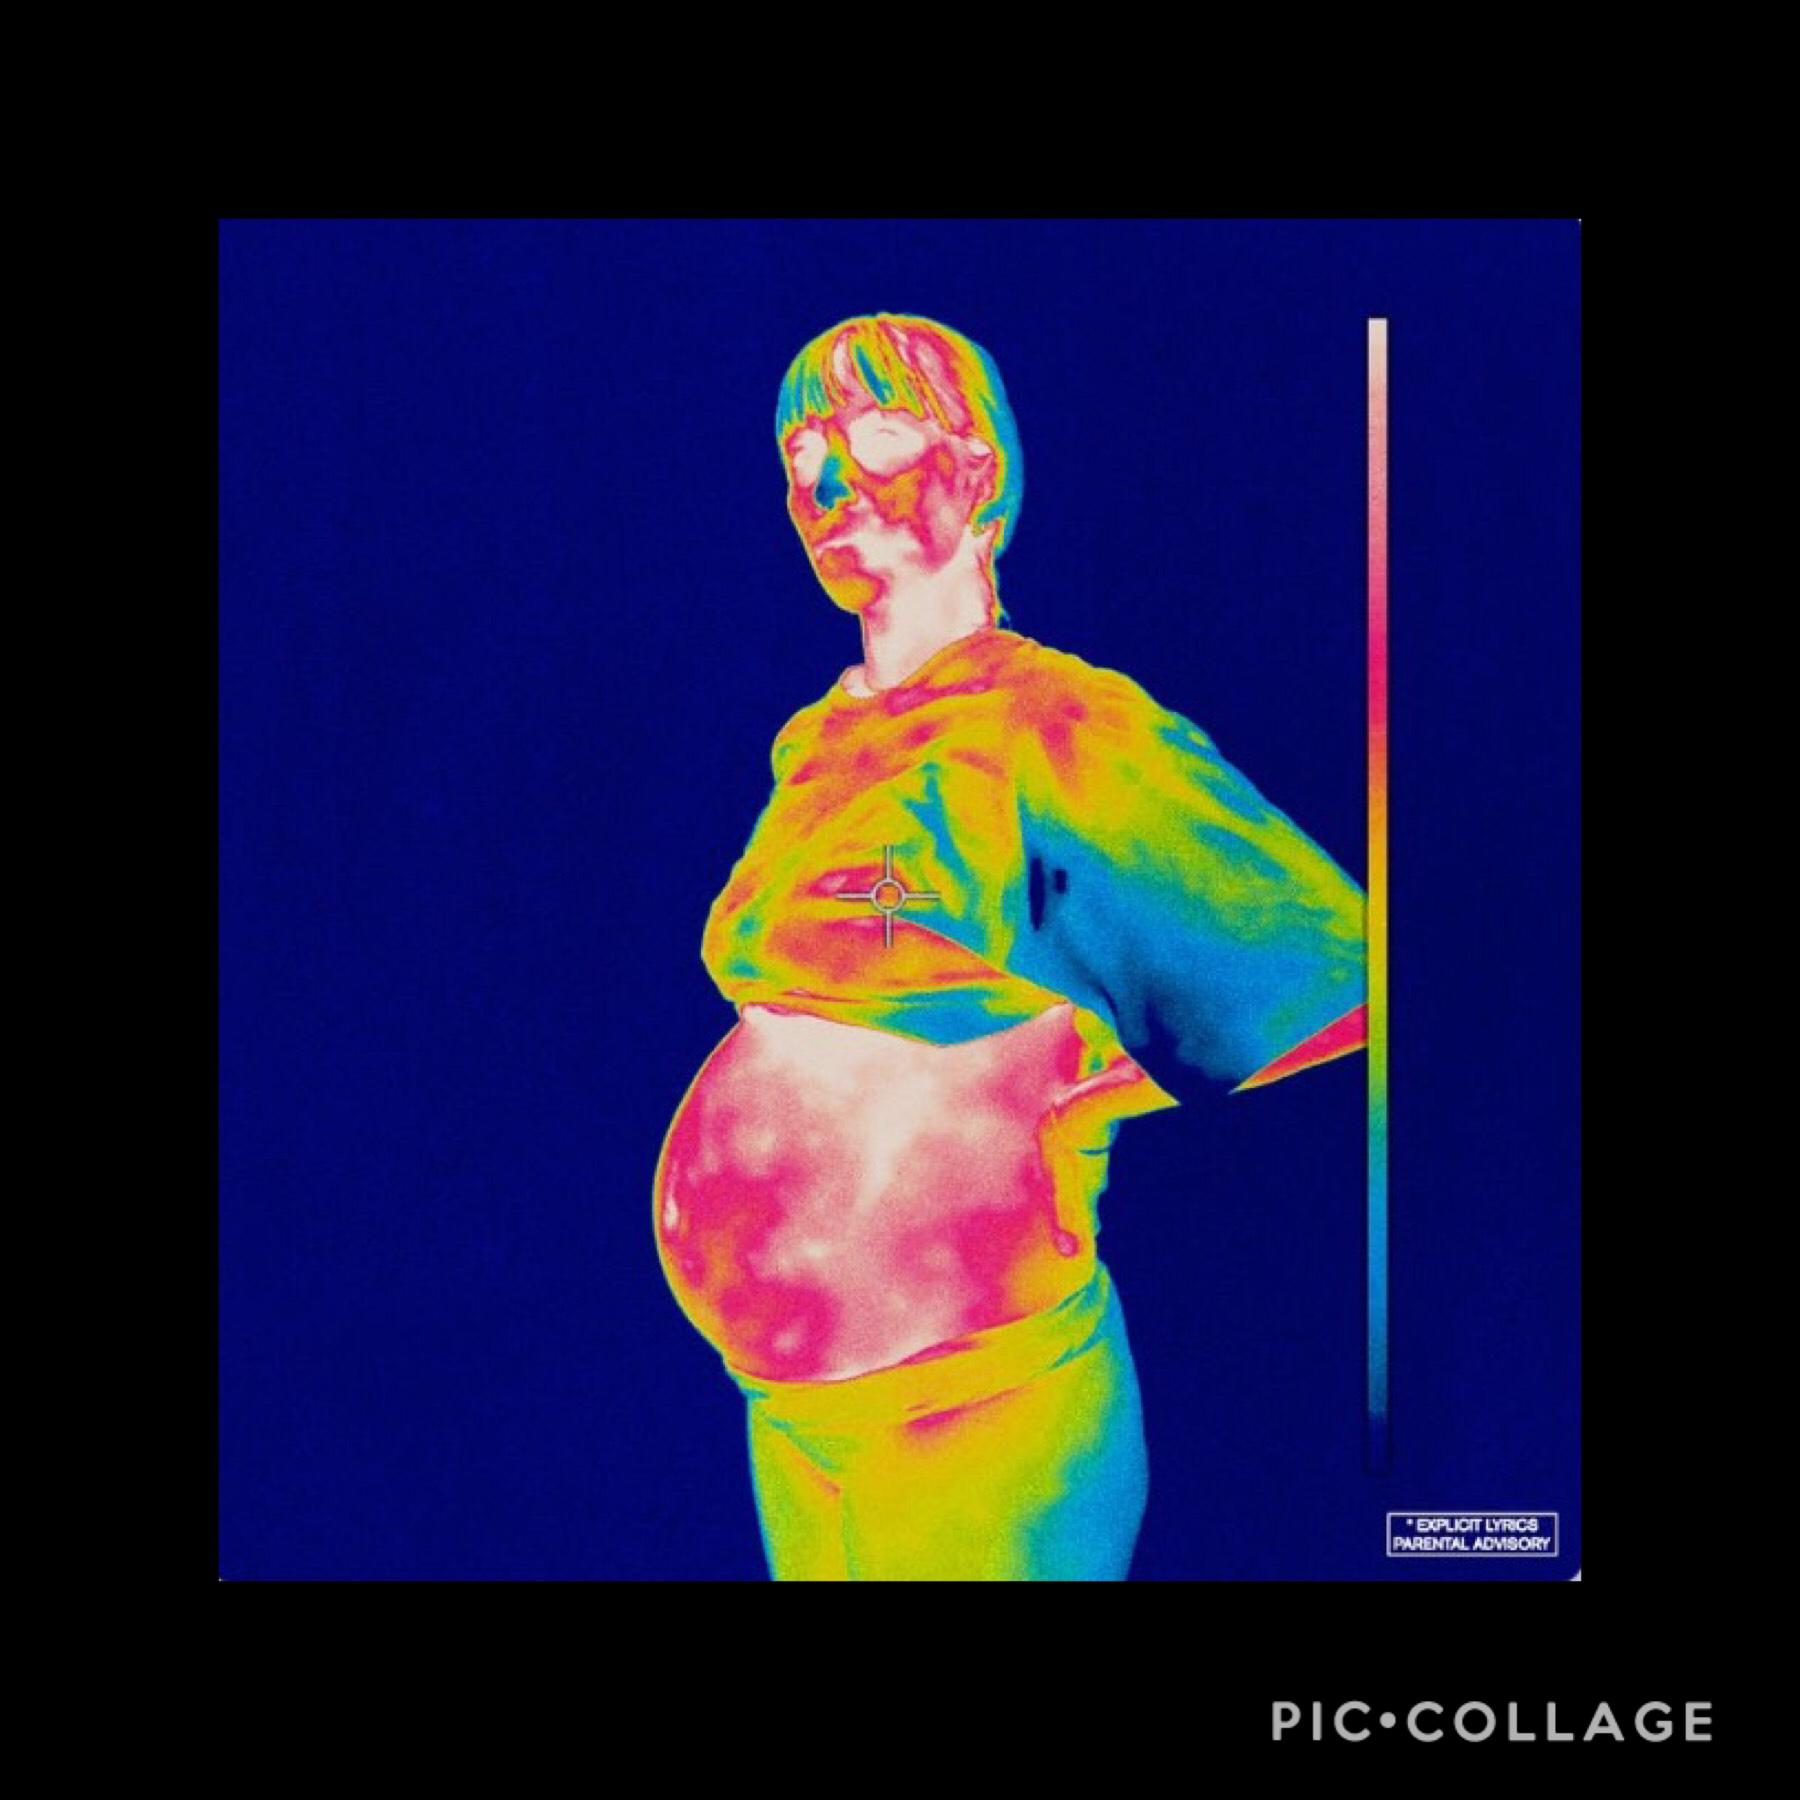 iridescence is one of brockhampton’s best albums hands down😌 also we got the day for junior prom yeet